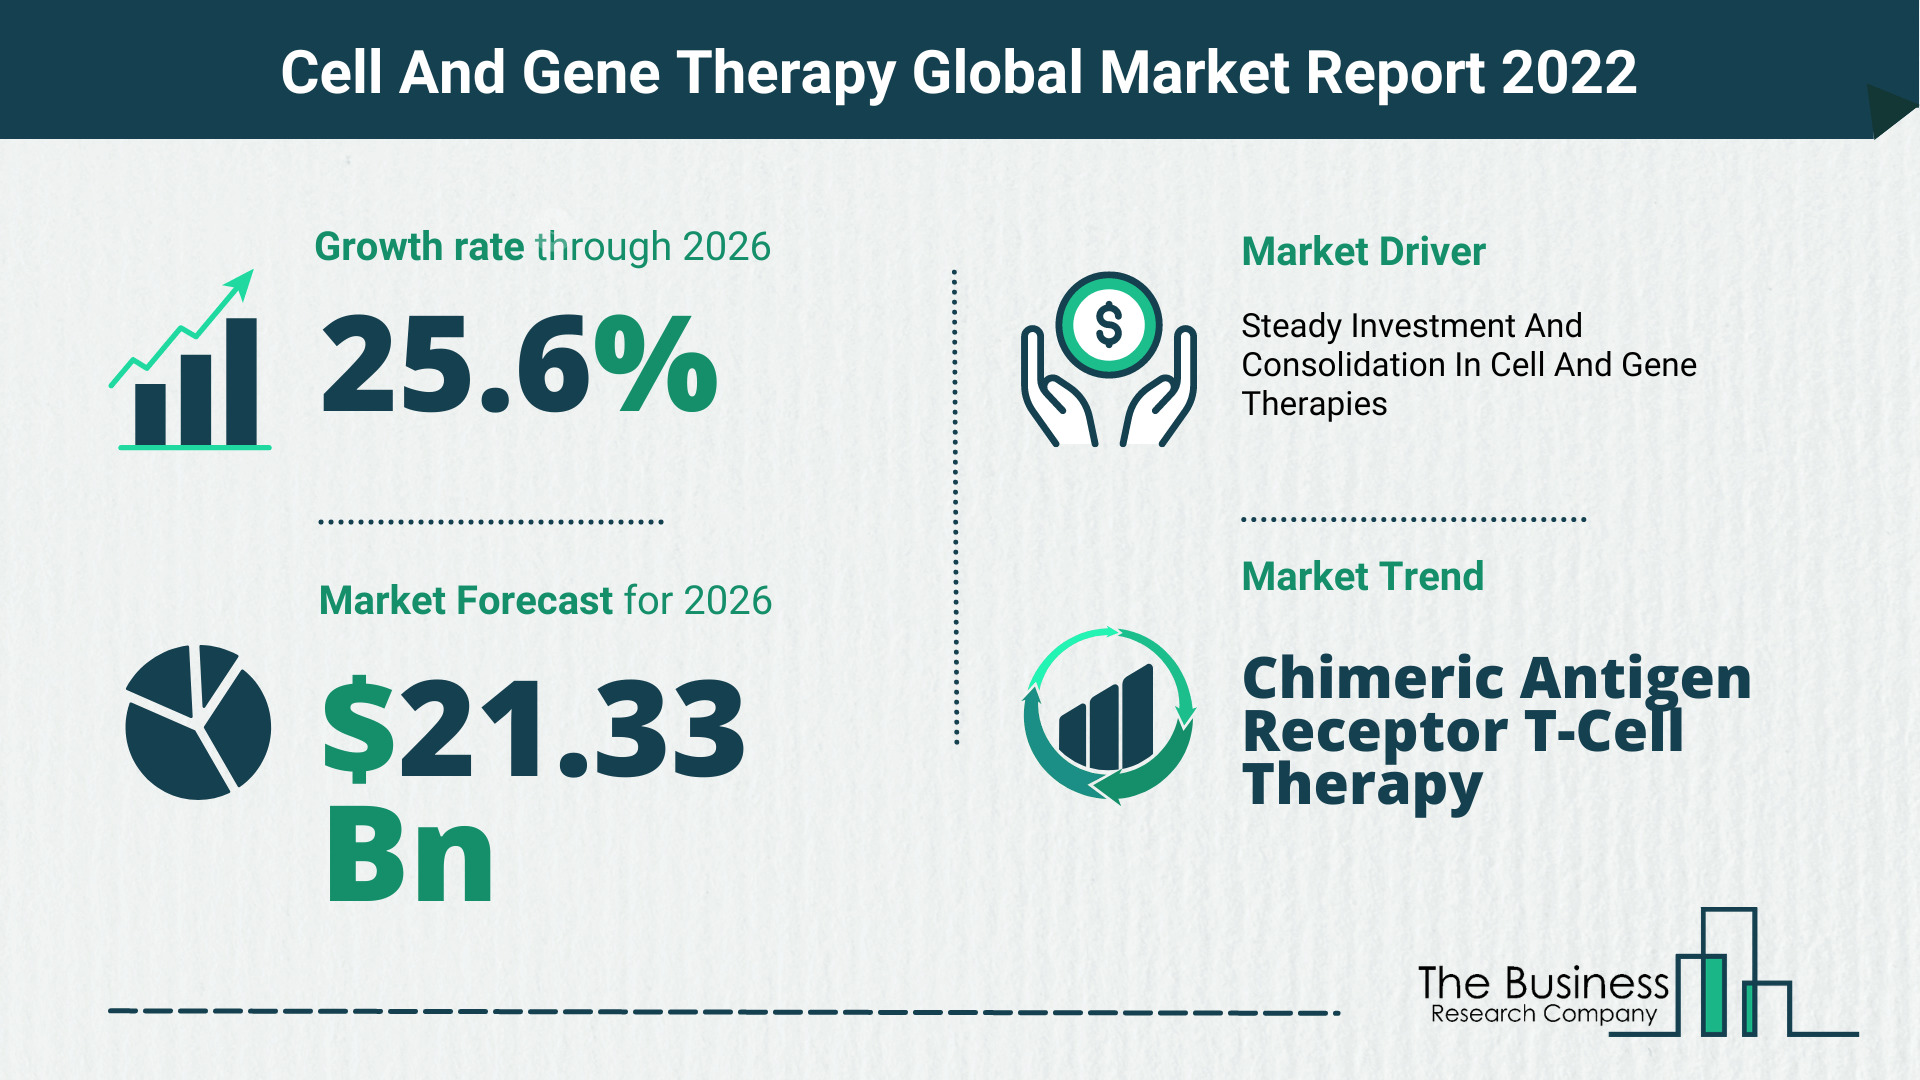 What Is The Cell And Gene Therapy Market Overview In 2022?